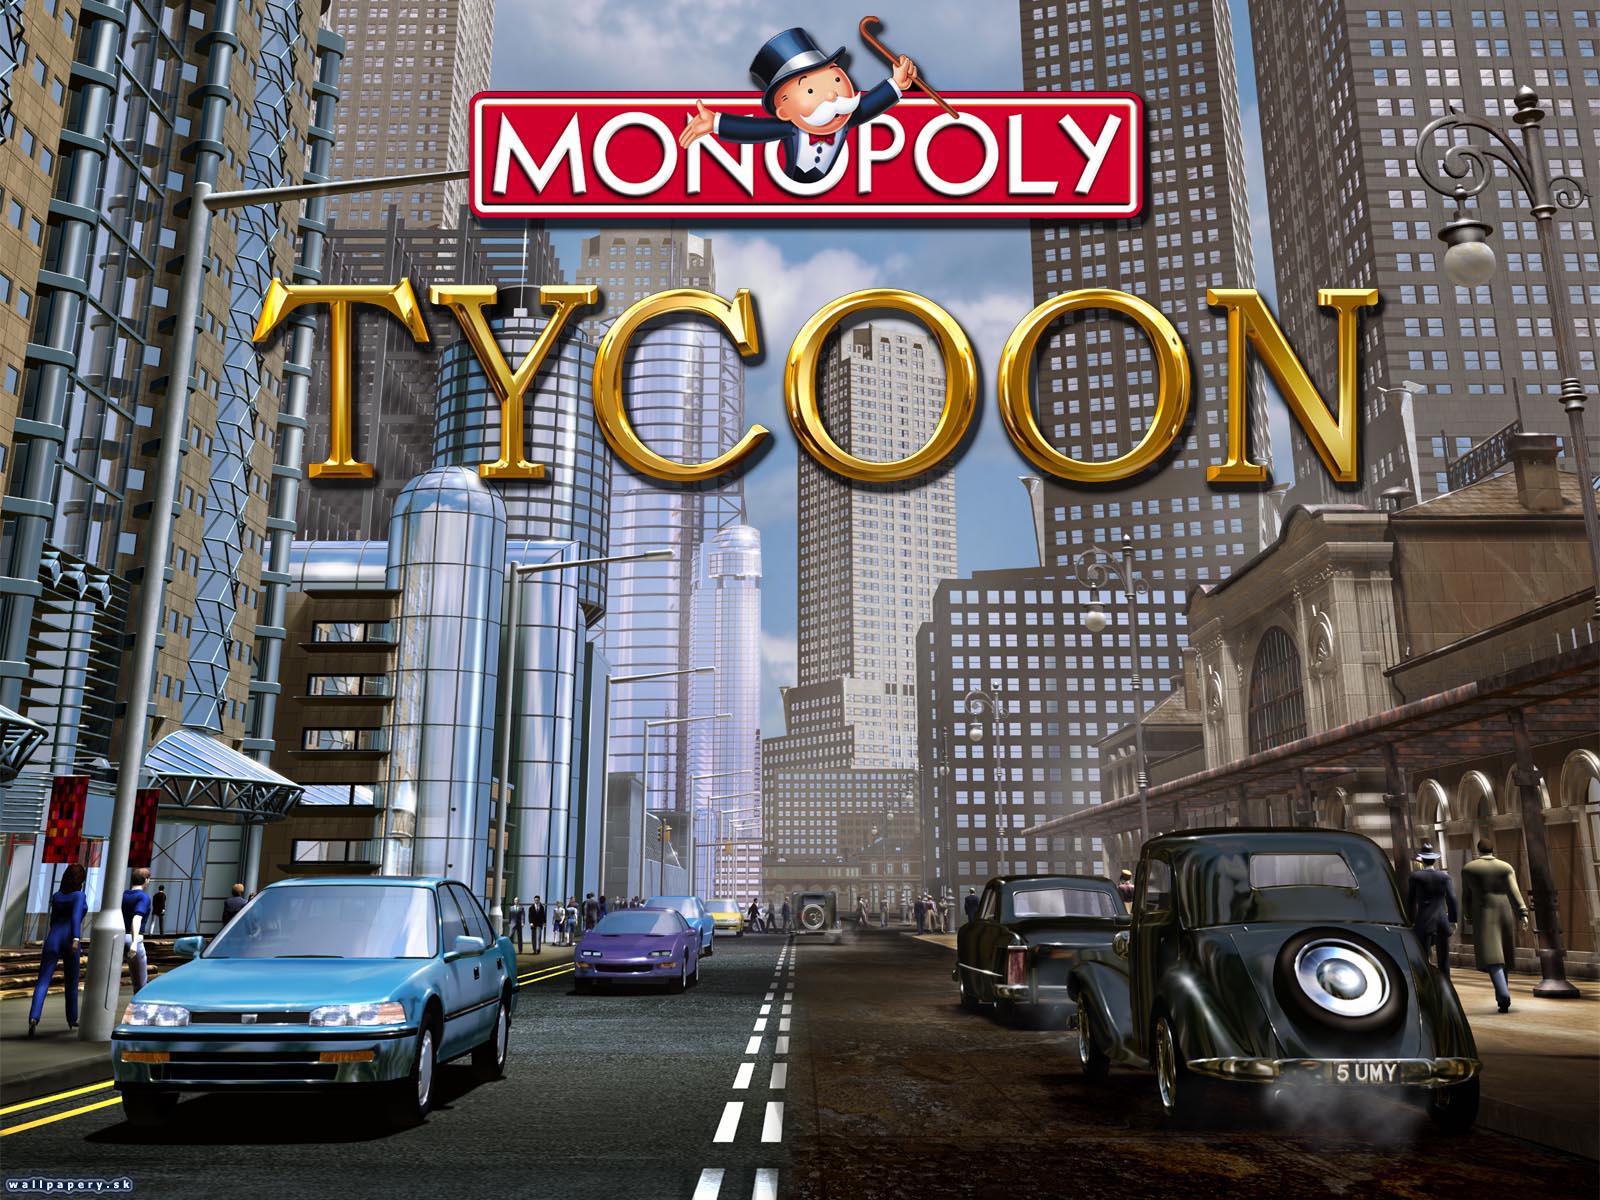 Monopoly Tycoon - wallpaper 4